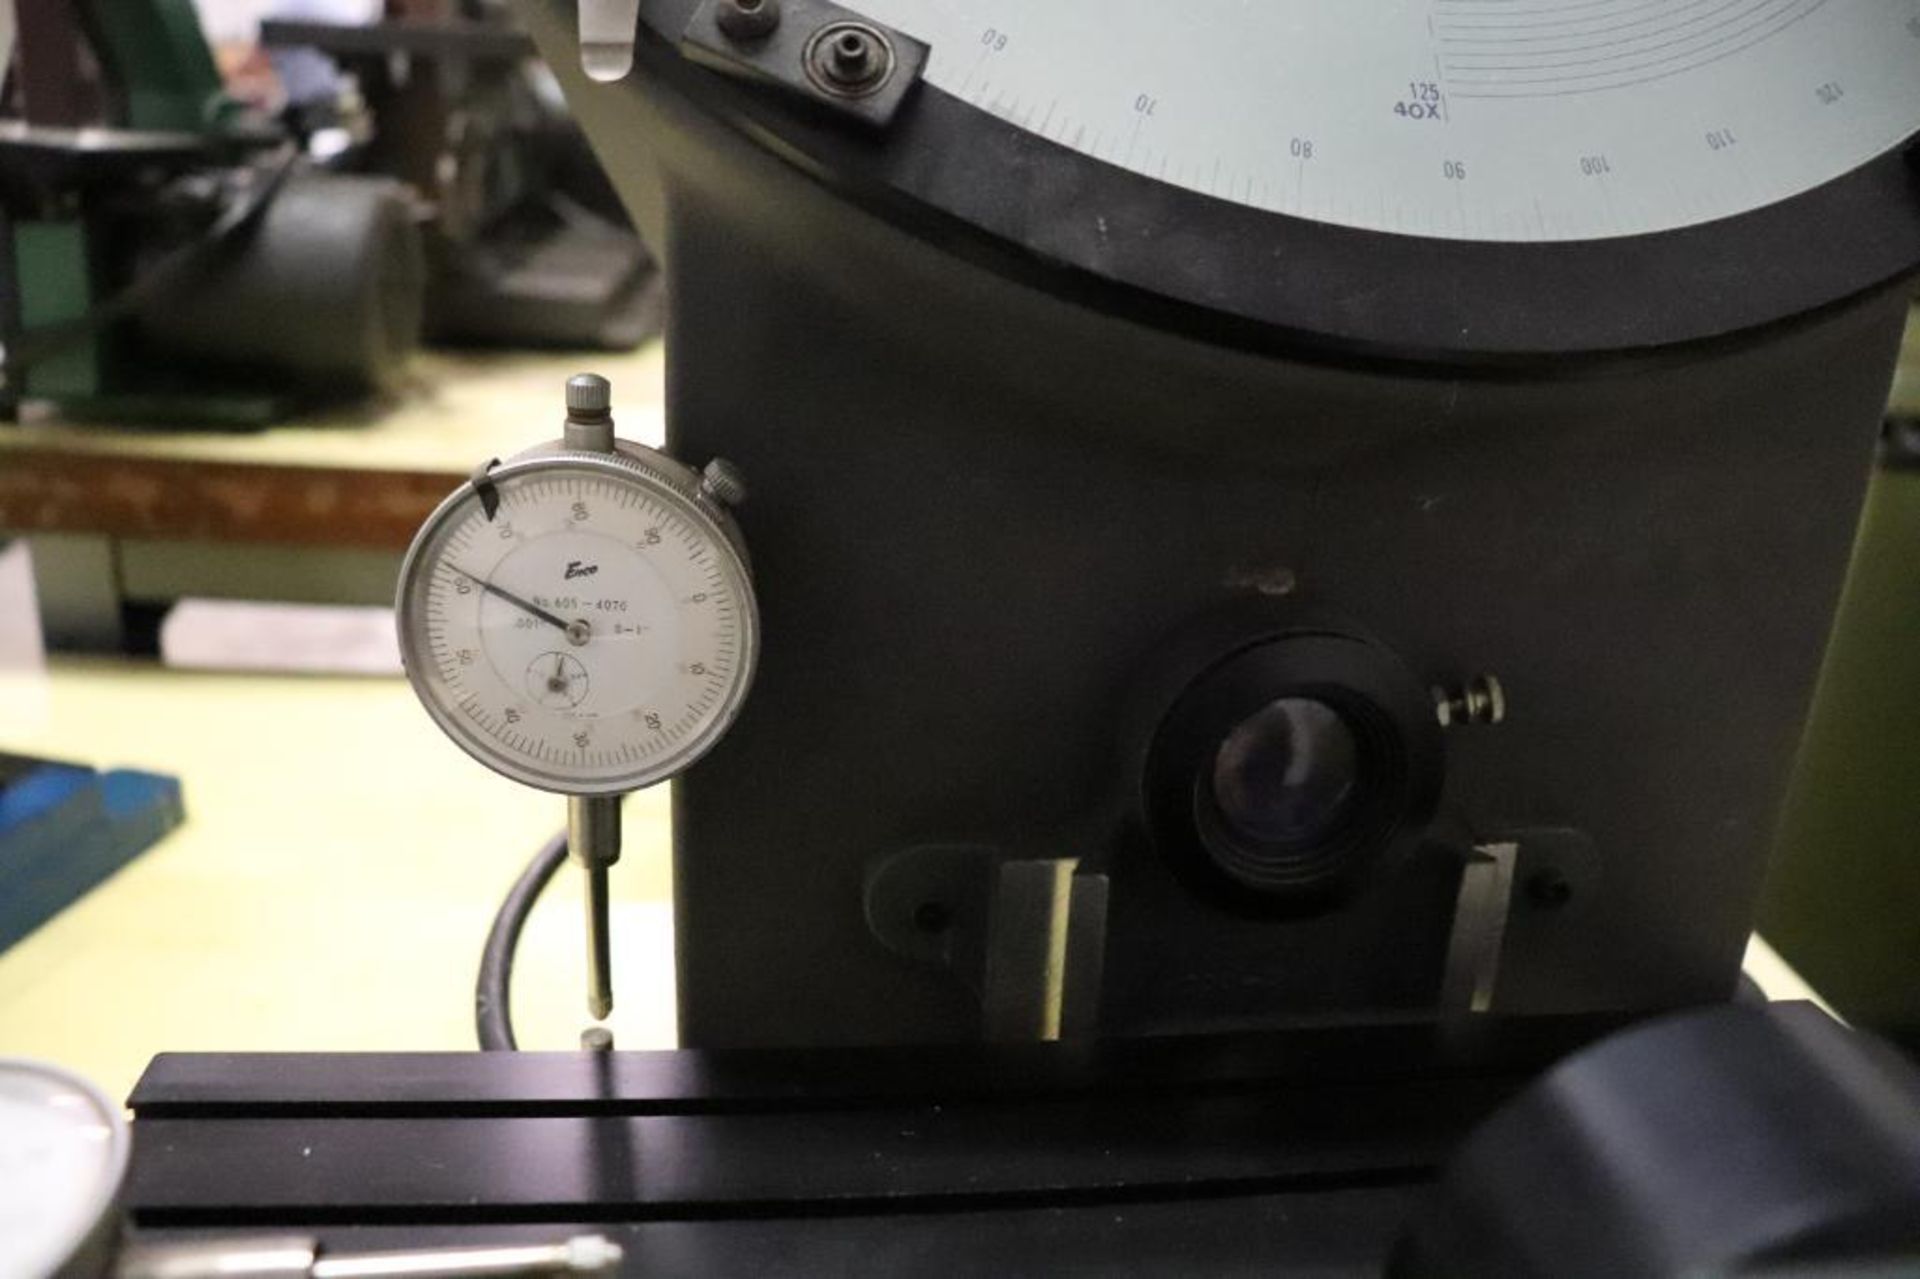 Bench top optical comparator with Enco dial indicators - Image 2 of 5